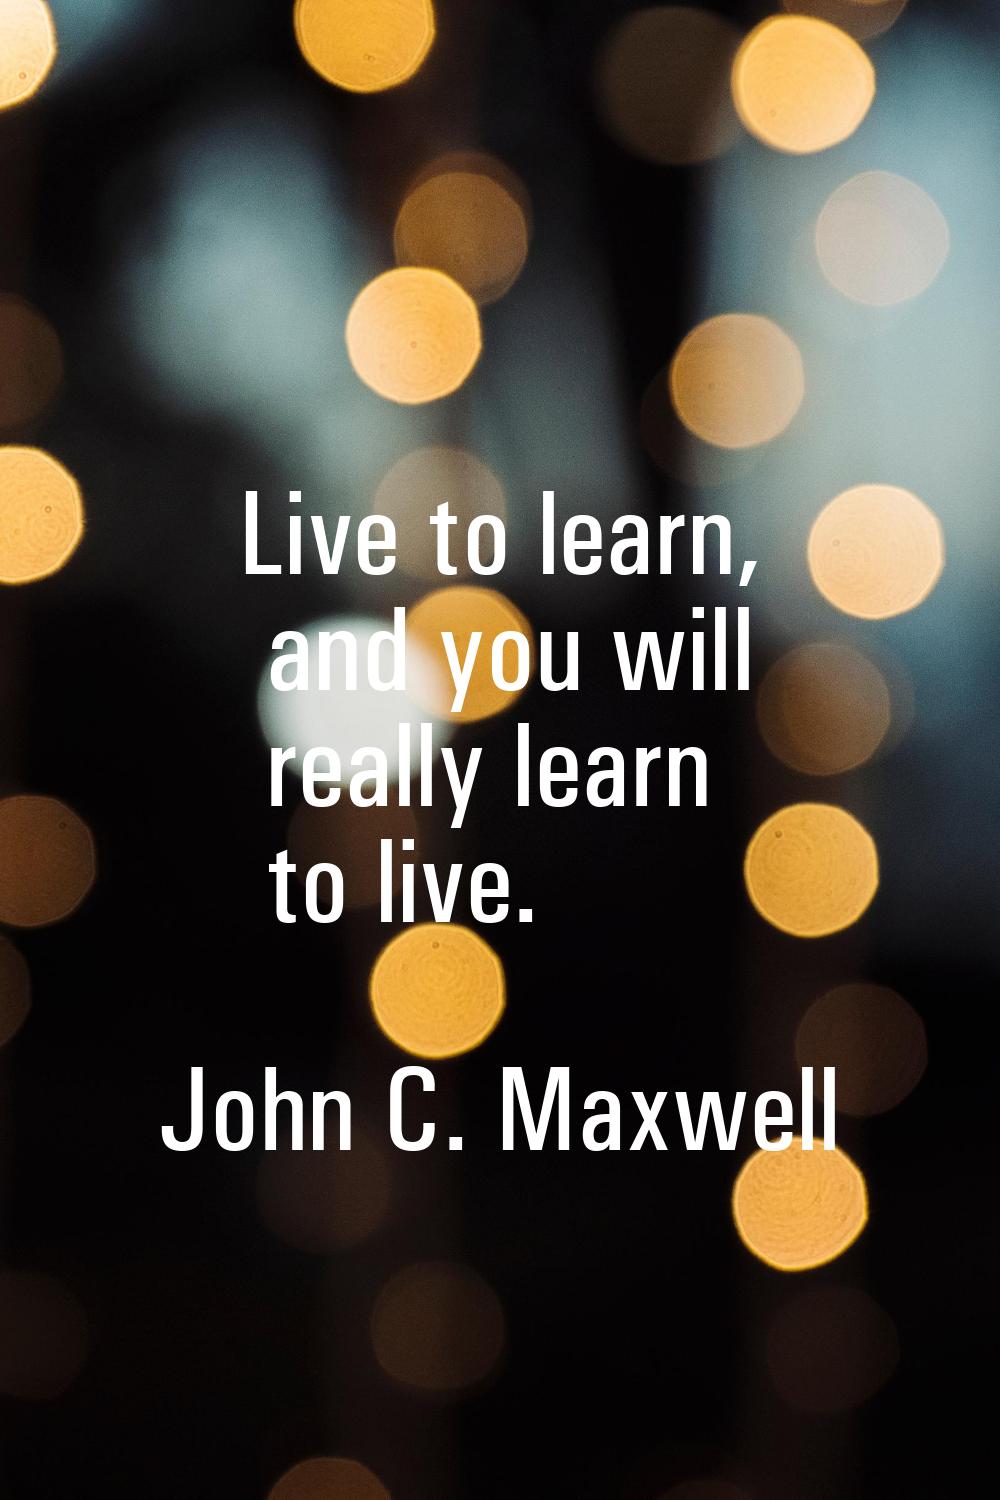 Live to learn, and you will really learn to live.